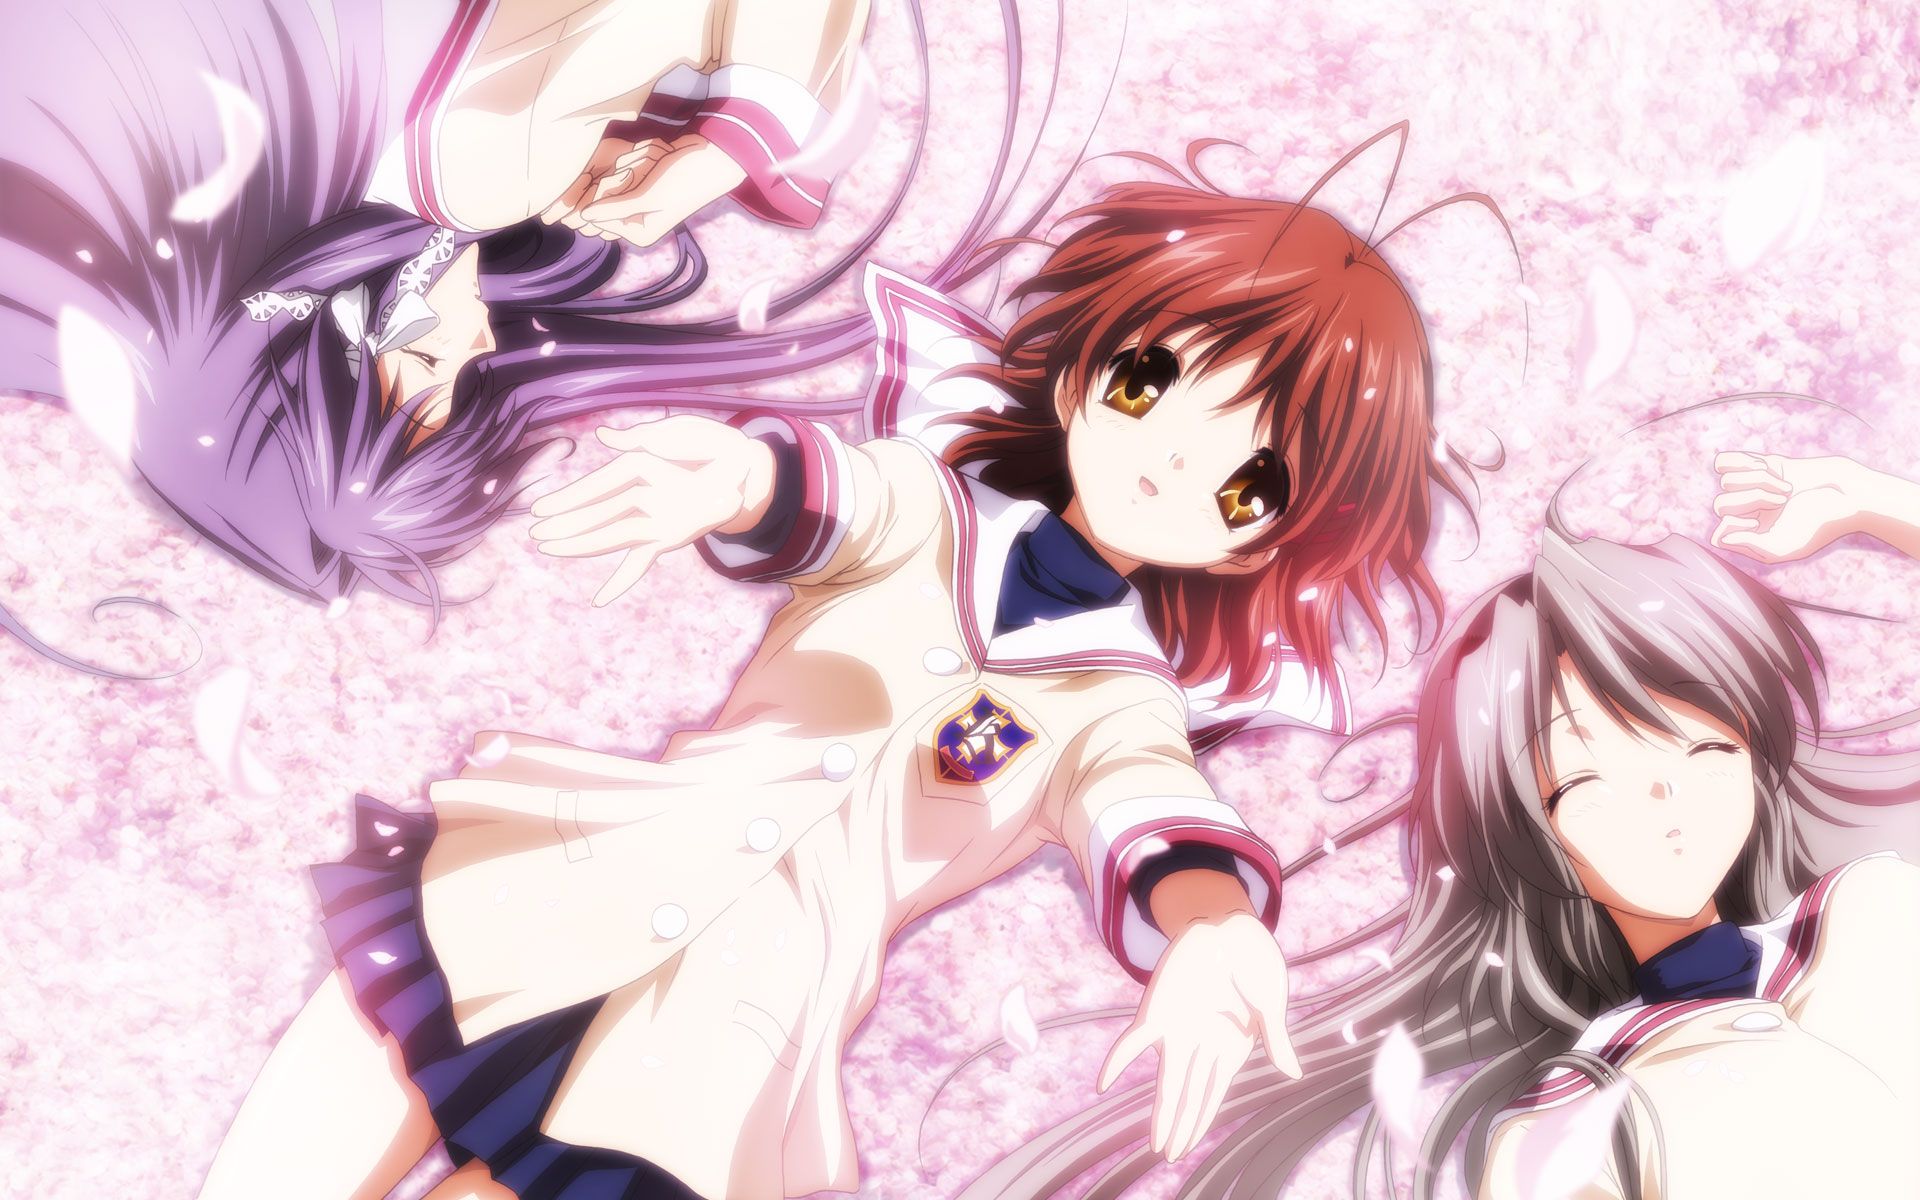 clannad-and-clannad-after-story-lubasakura-30798156-1920-1200.jpg